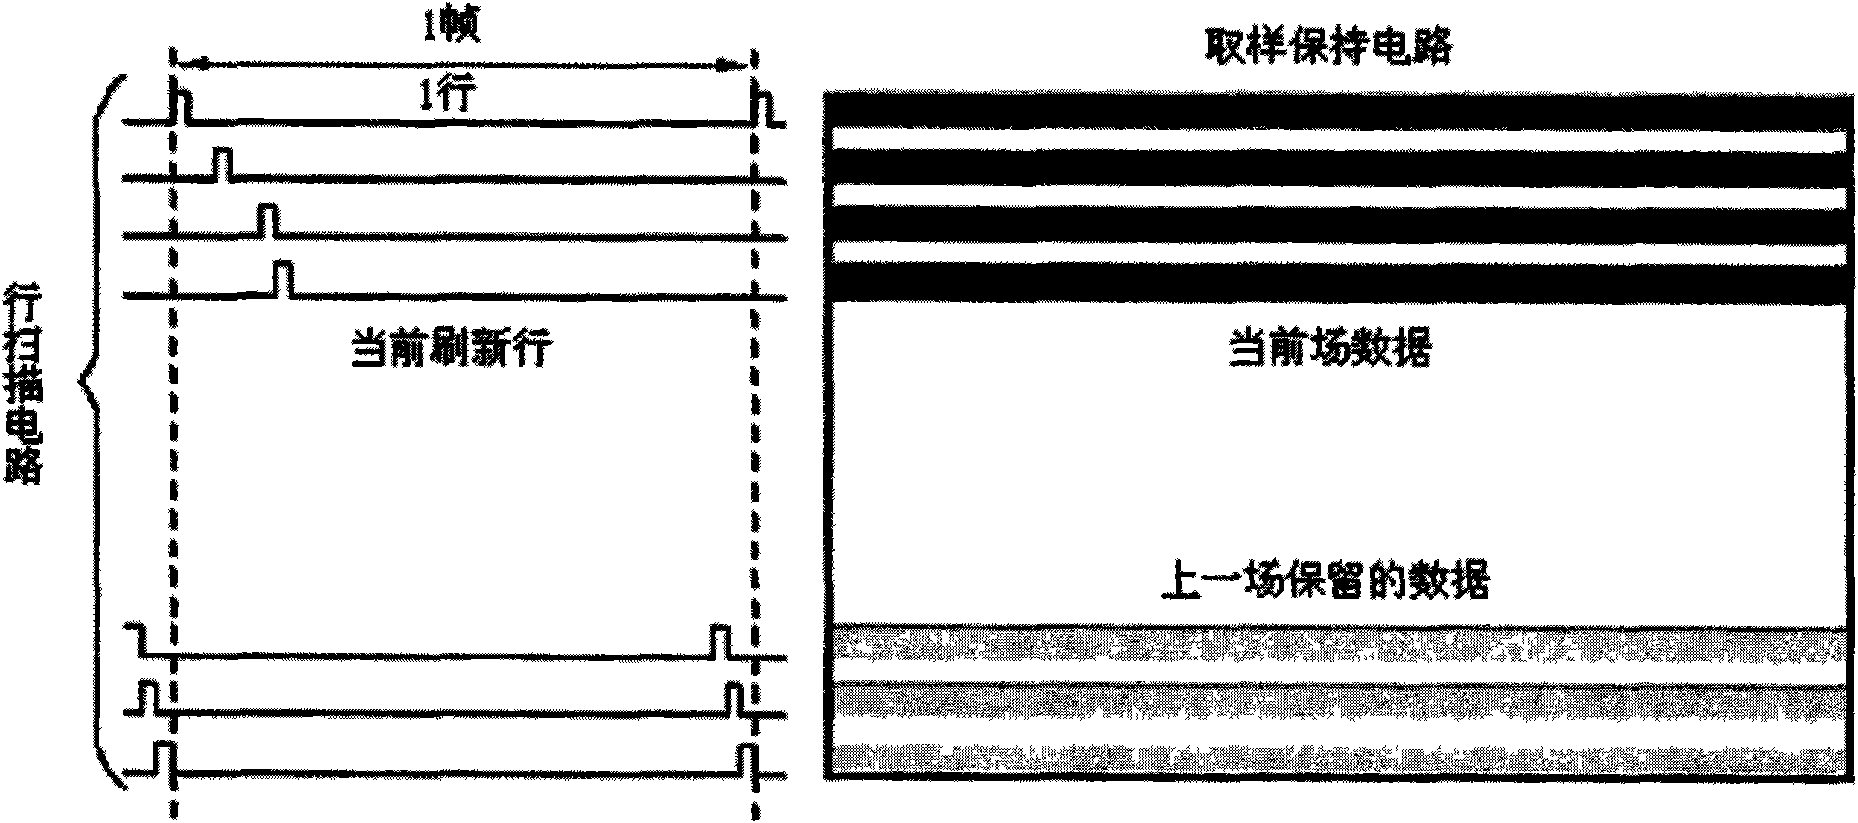 Backlight scanning control method and device of 3D liquid crystal television